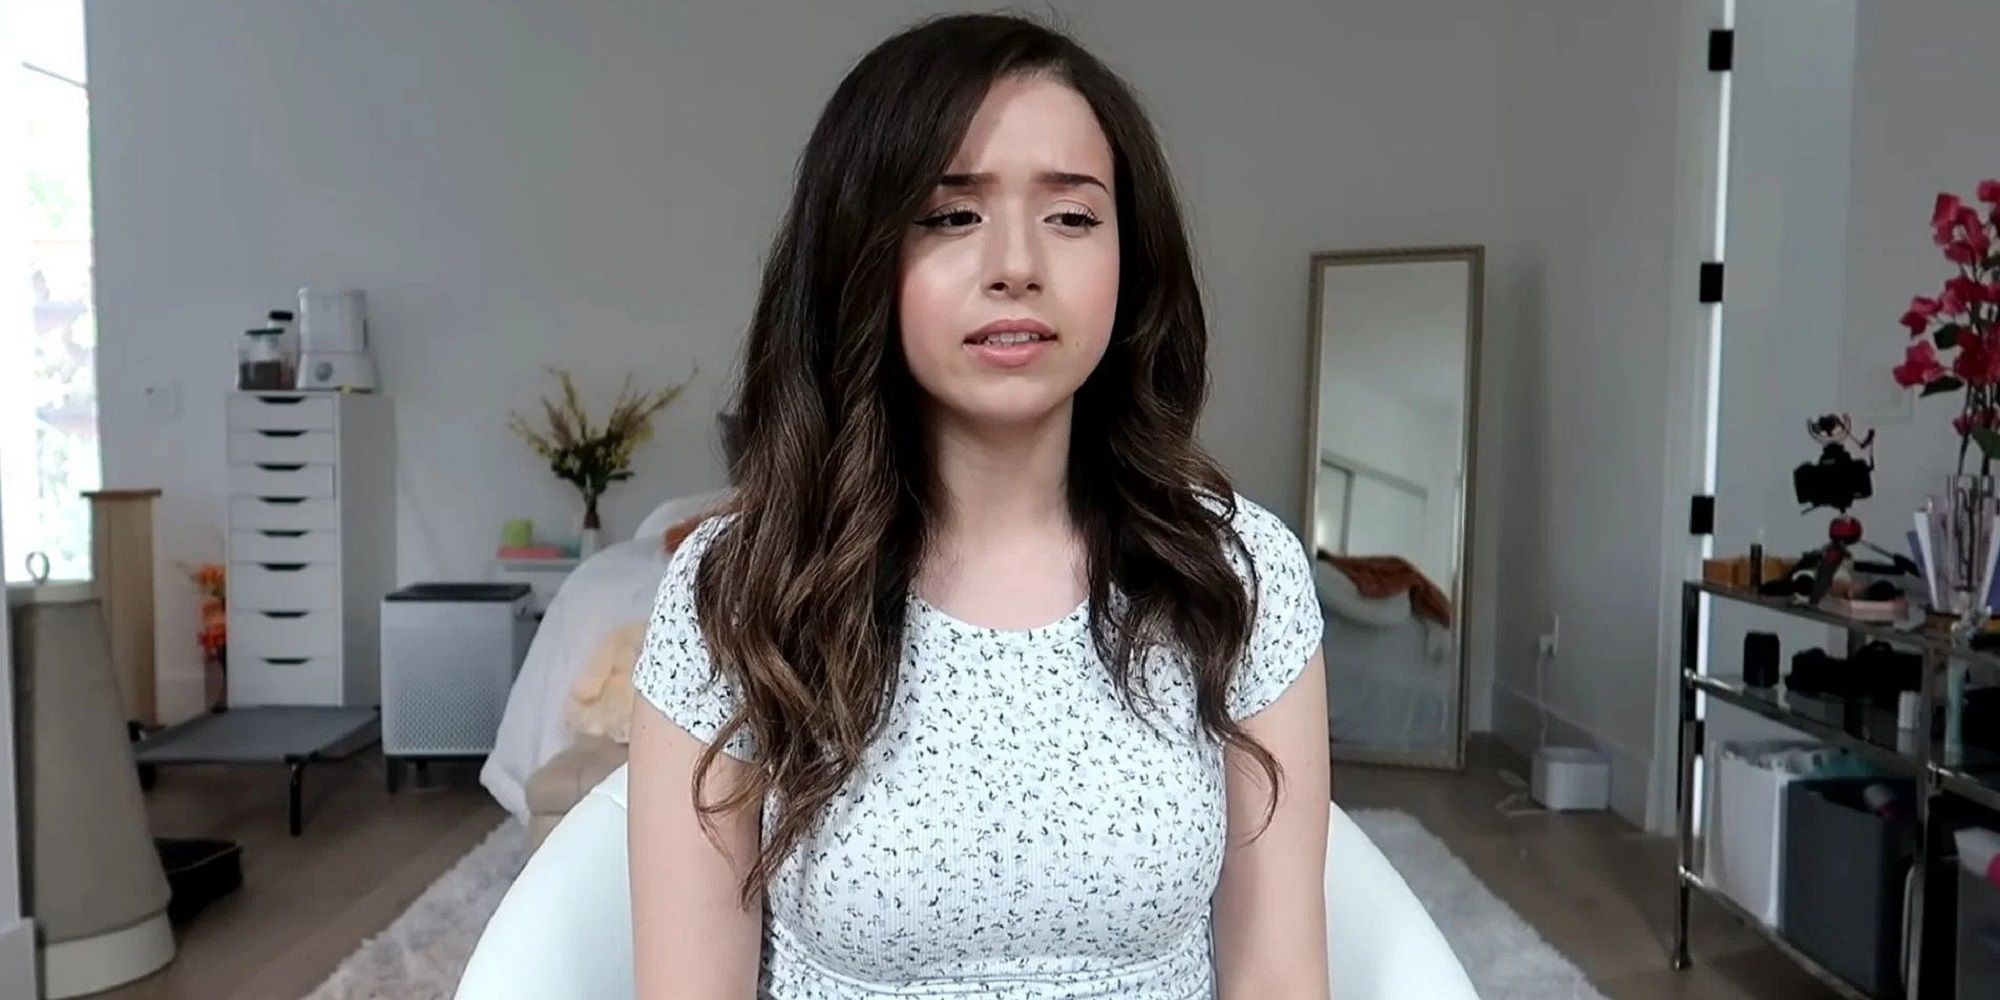 Streamer Pokimane With Serious Expression Wearing White Specked Shirt 